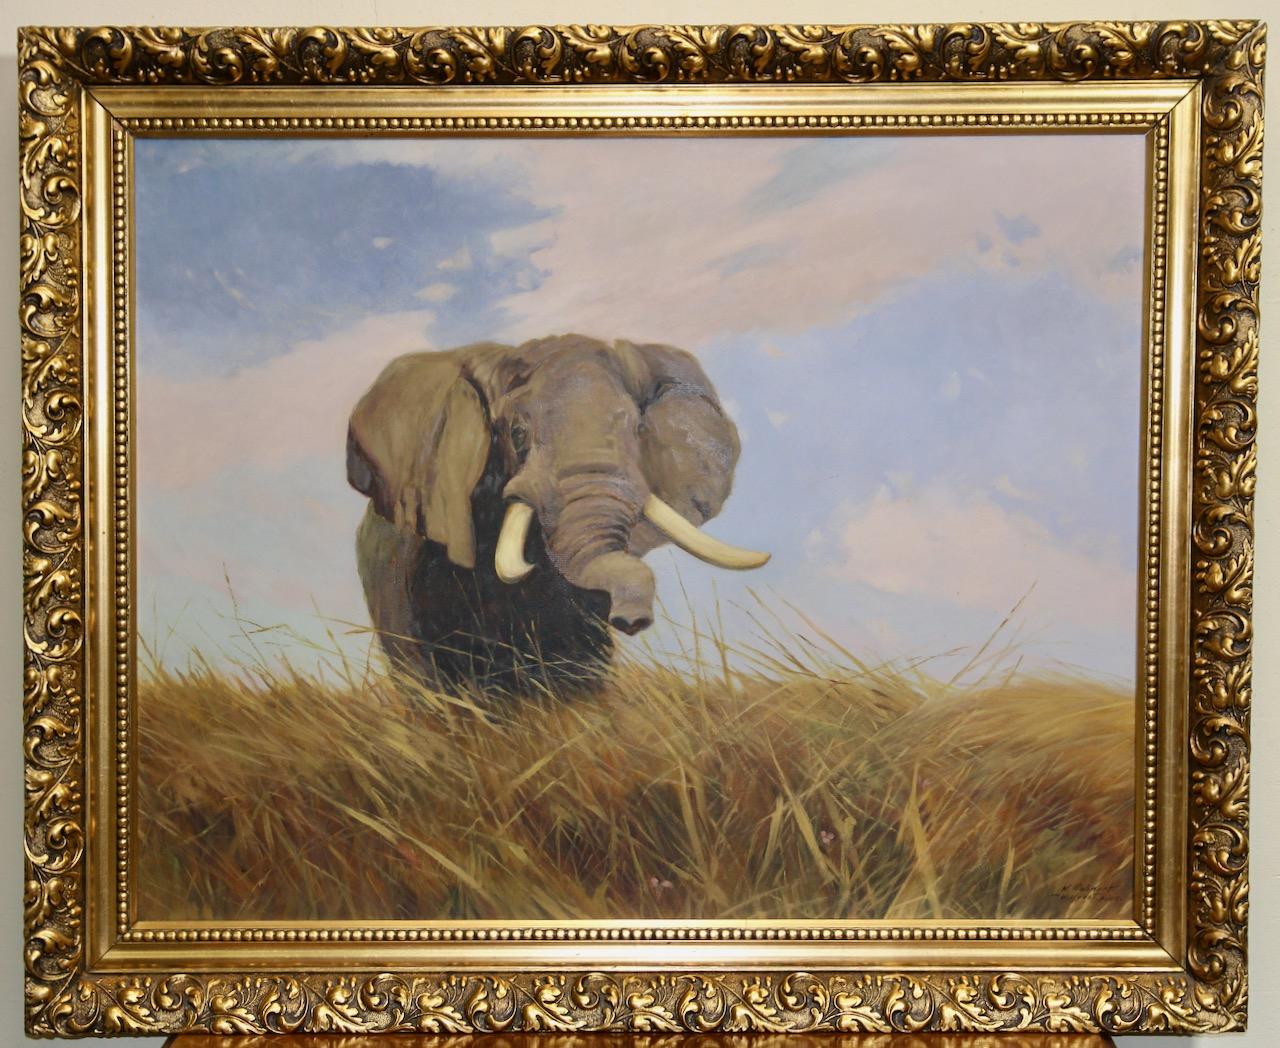 Decorative oil painting after Wilhelm Kuhnert. Safari landscape with elephant.

Dimensions without frame in cm 71.5 x 90.5
Dimensions with frame in cm 88 x 108

Immerse yourself in the majestic world of the African savannah with this remarkable copy